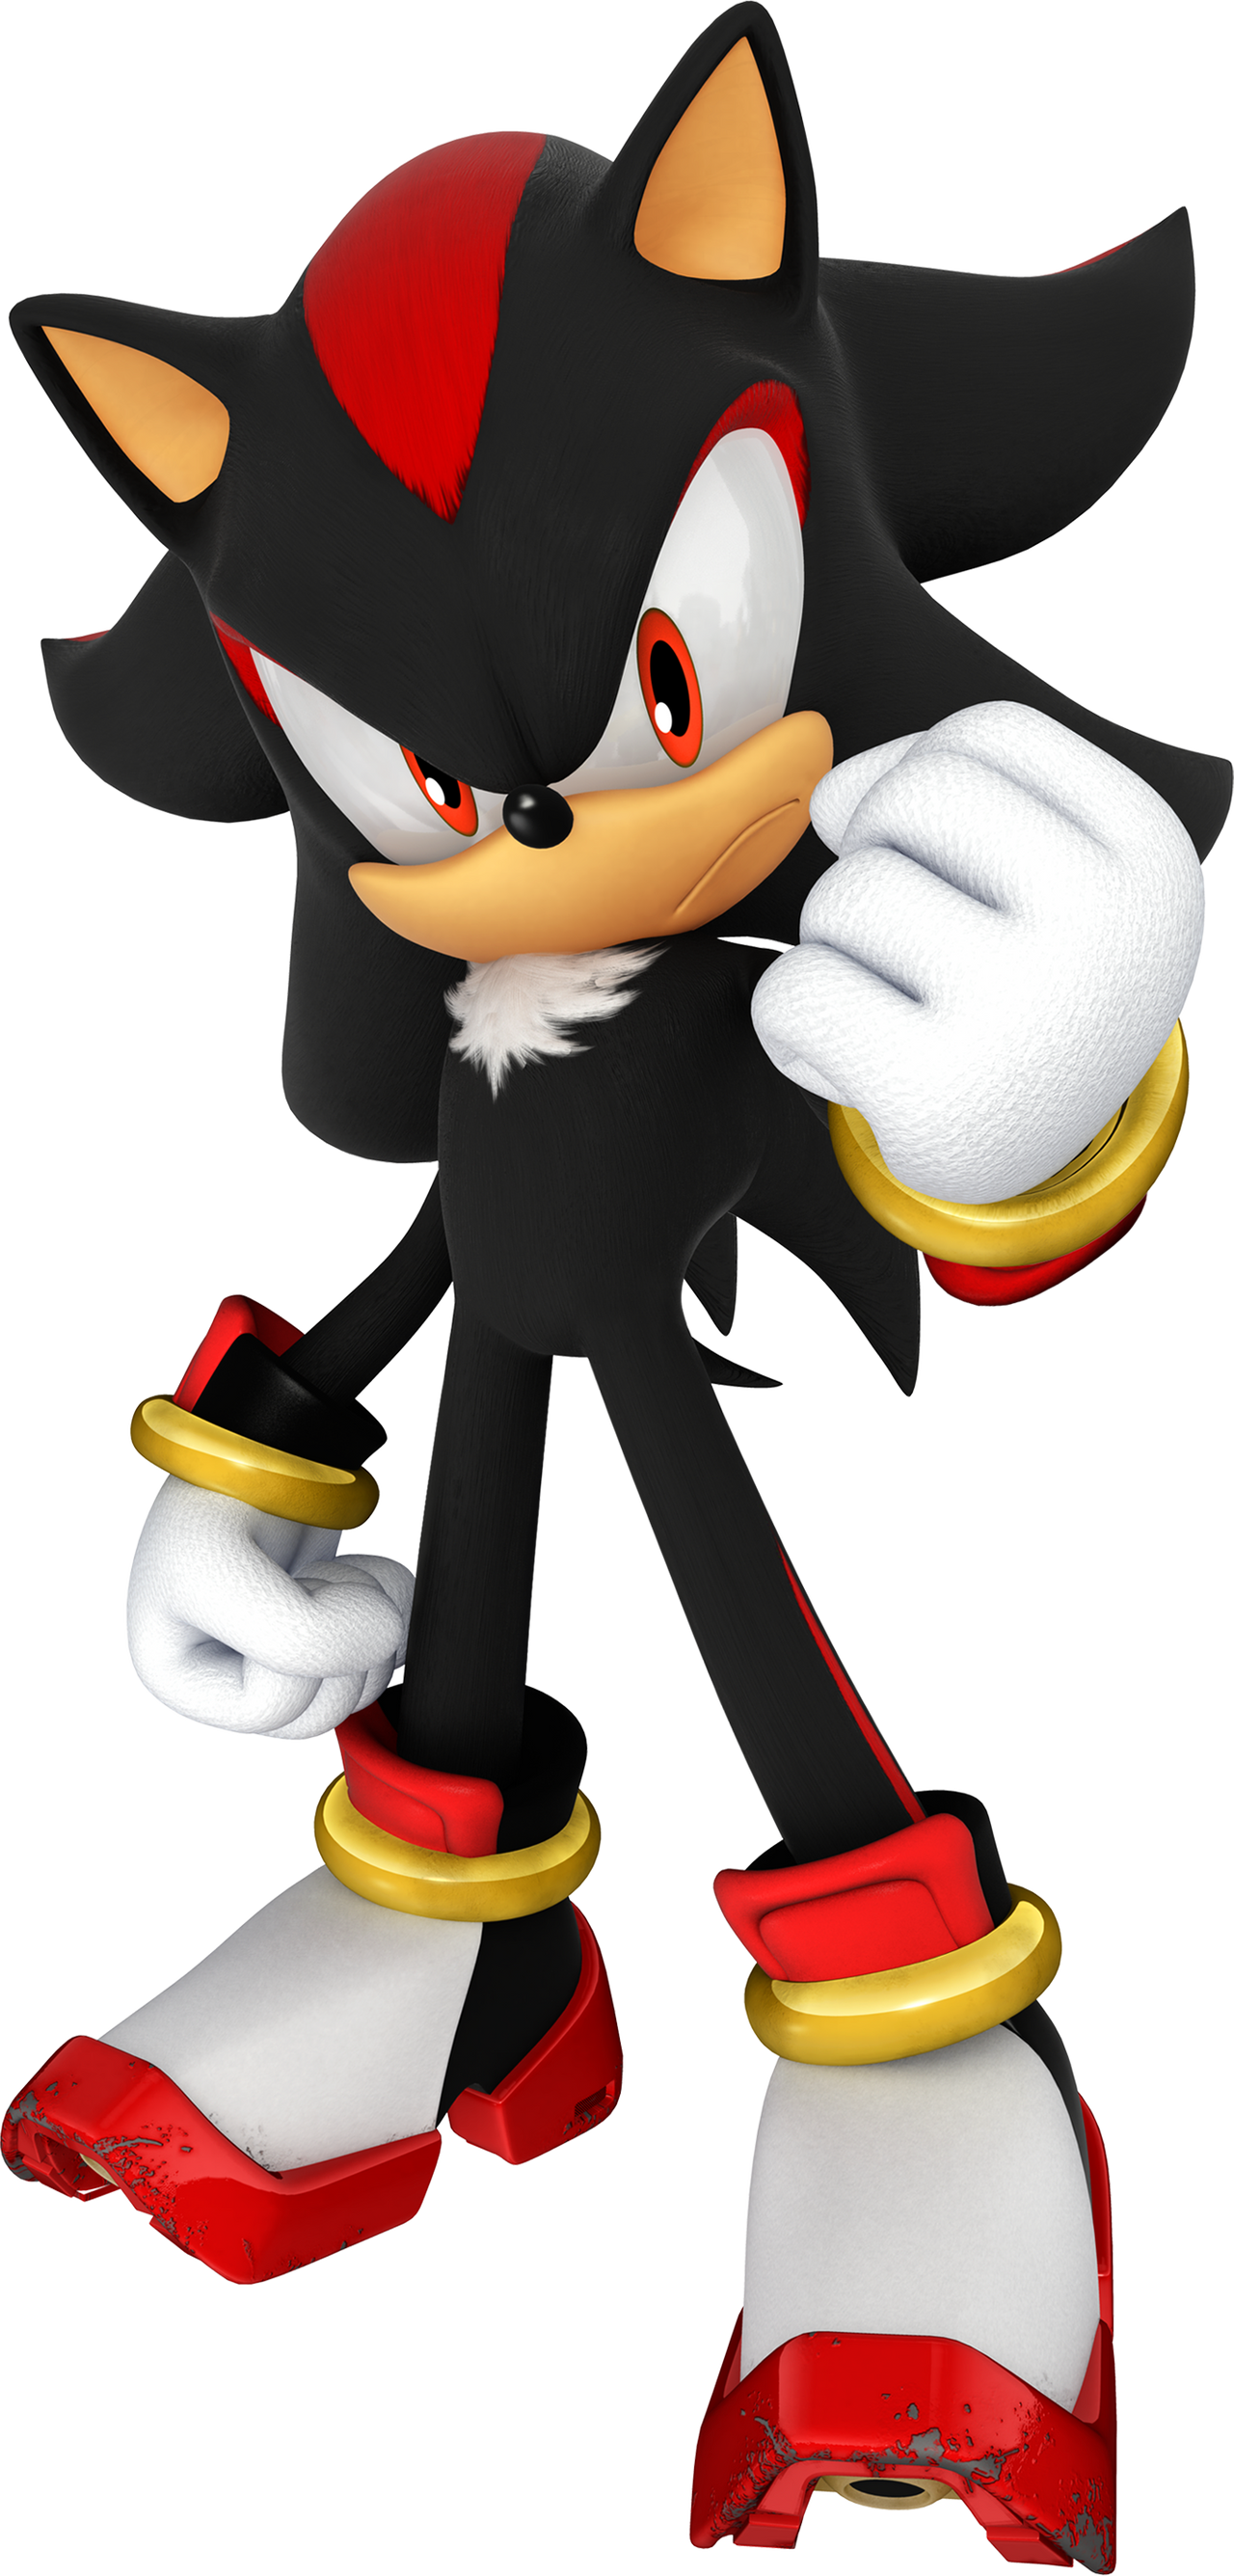 Shadow the Hedgehog png images